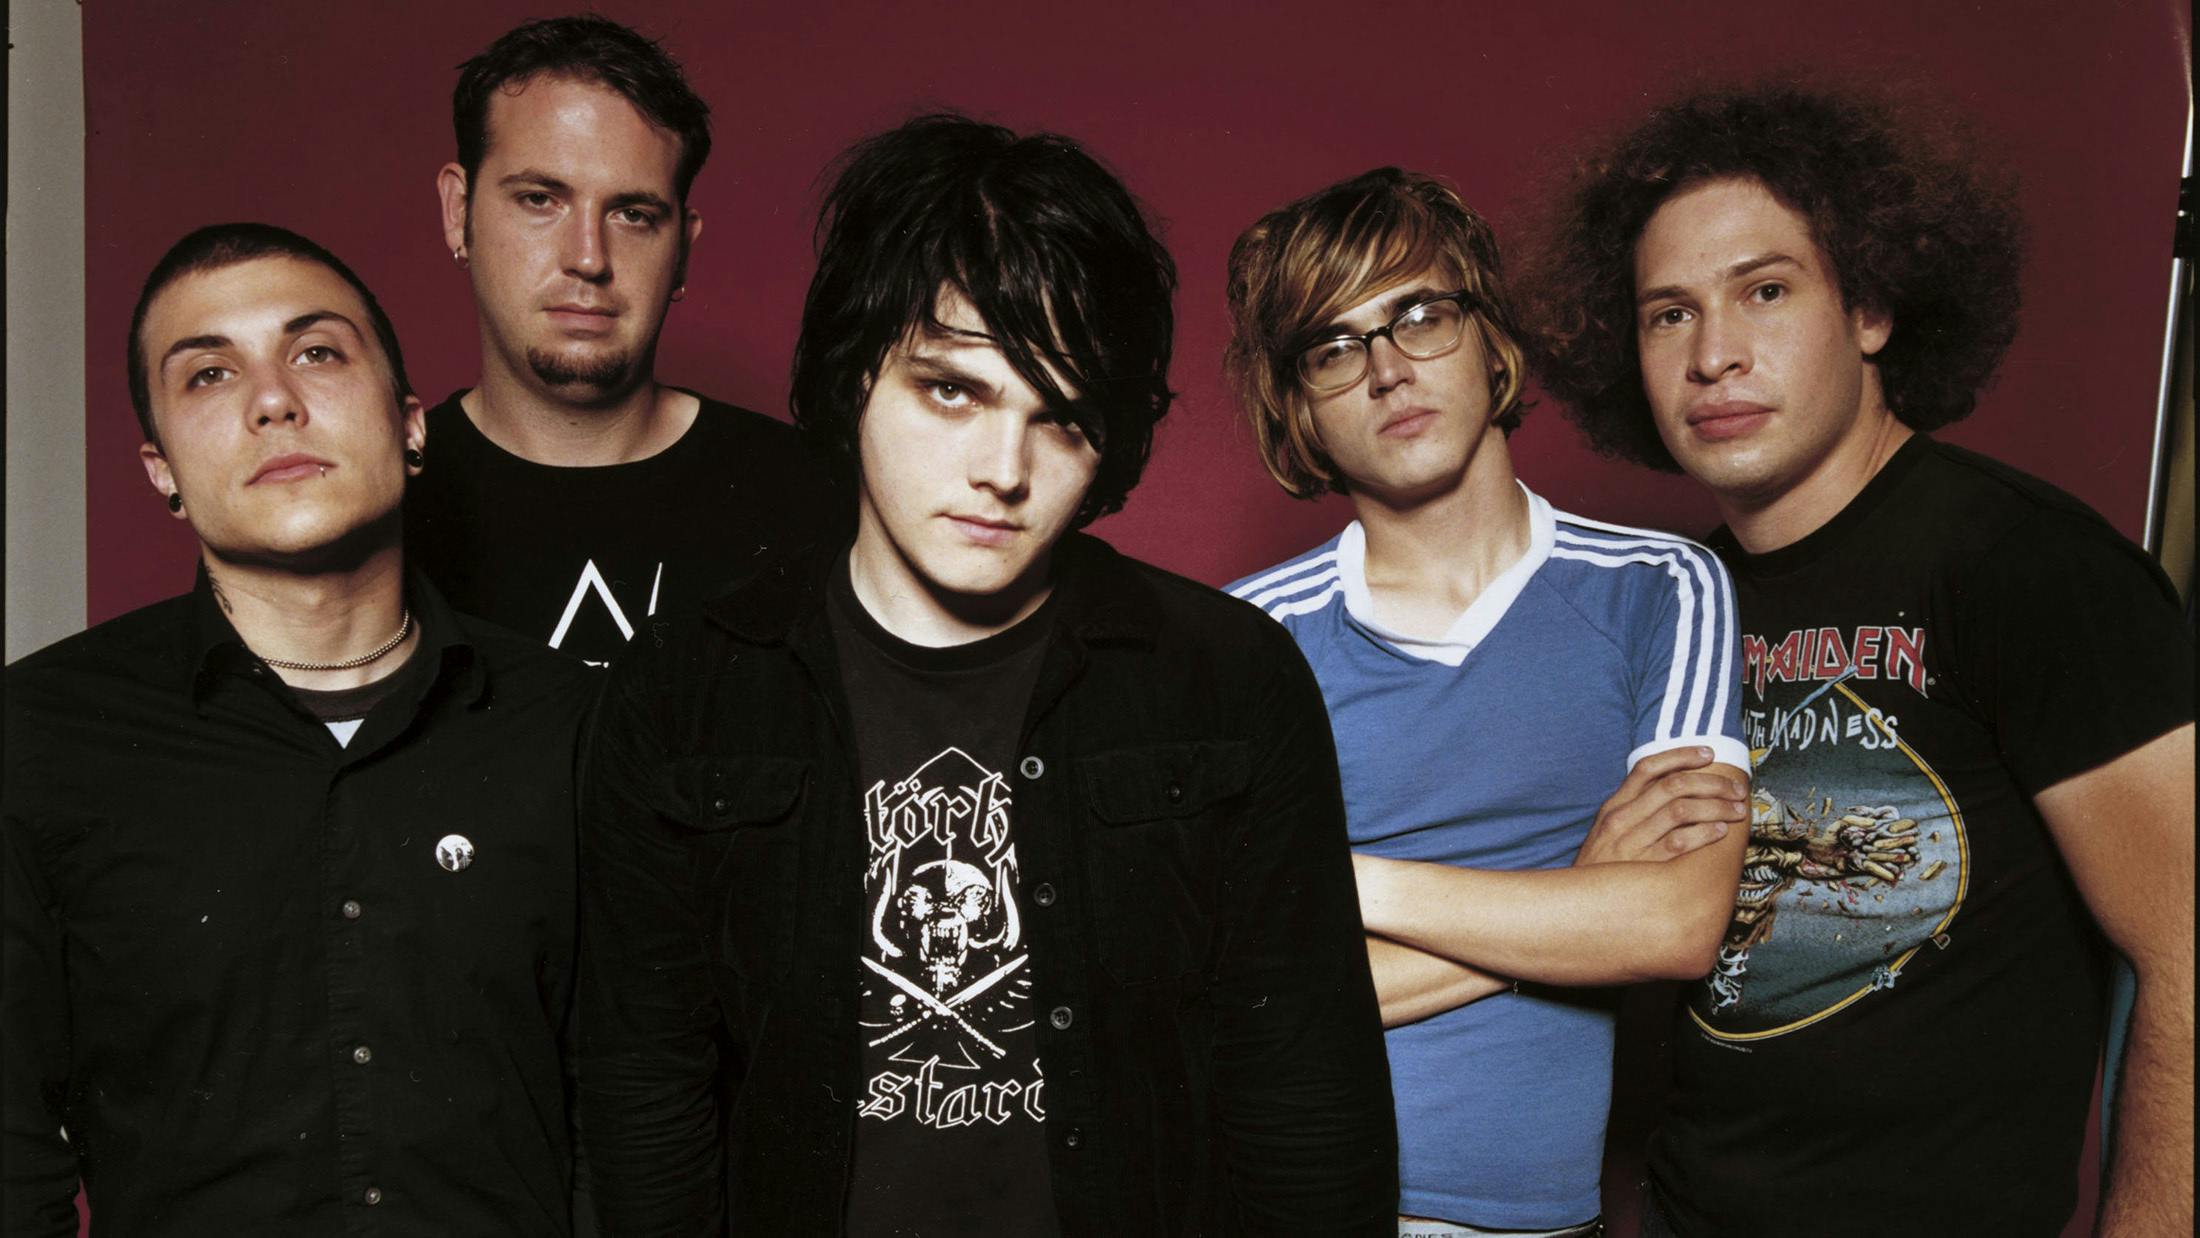 Gerard Way On My Chemical Romance's Breakthrough Years And Working On The Umbrella Academy